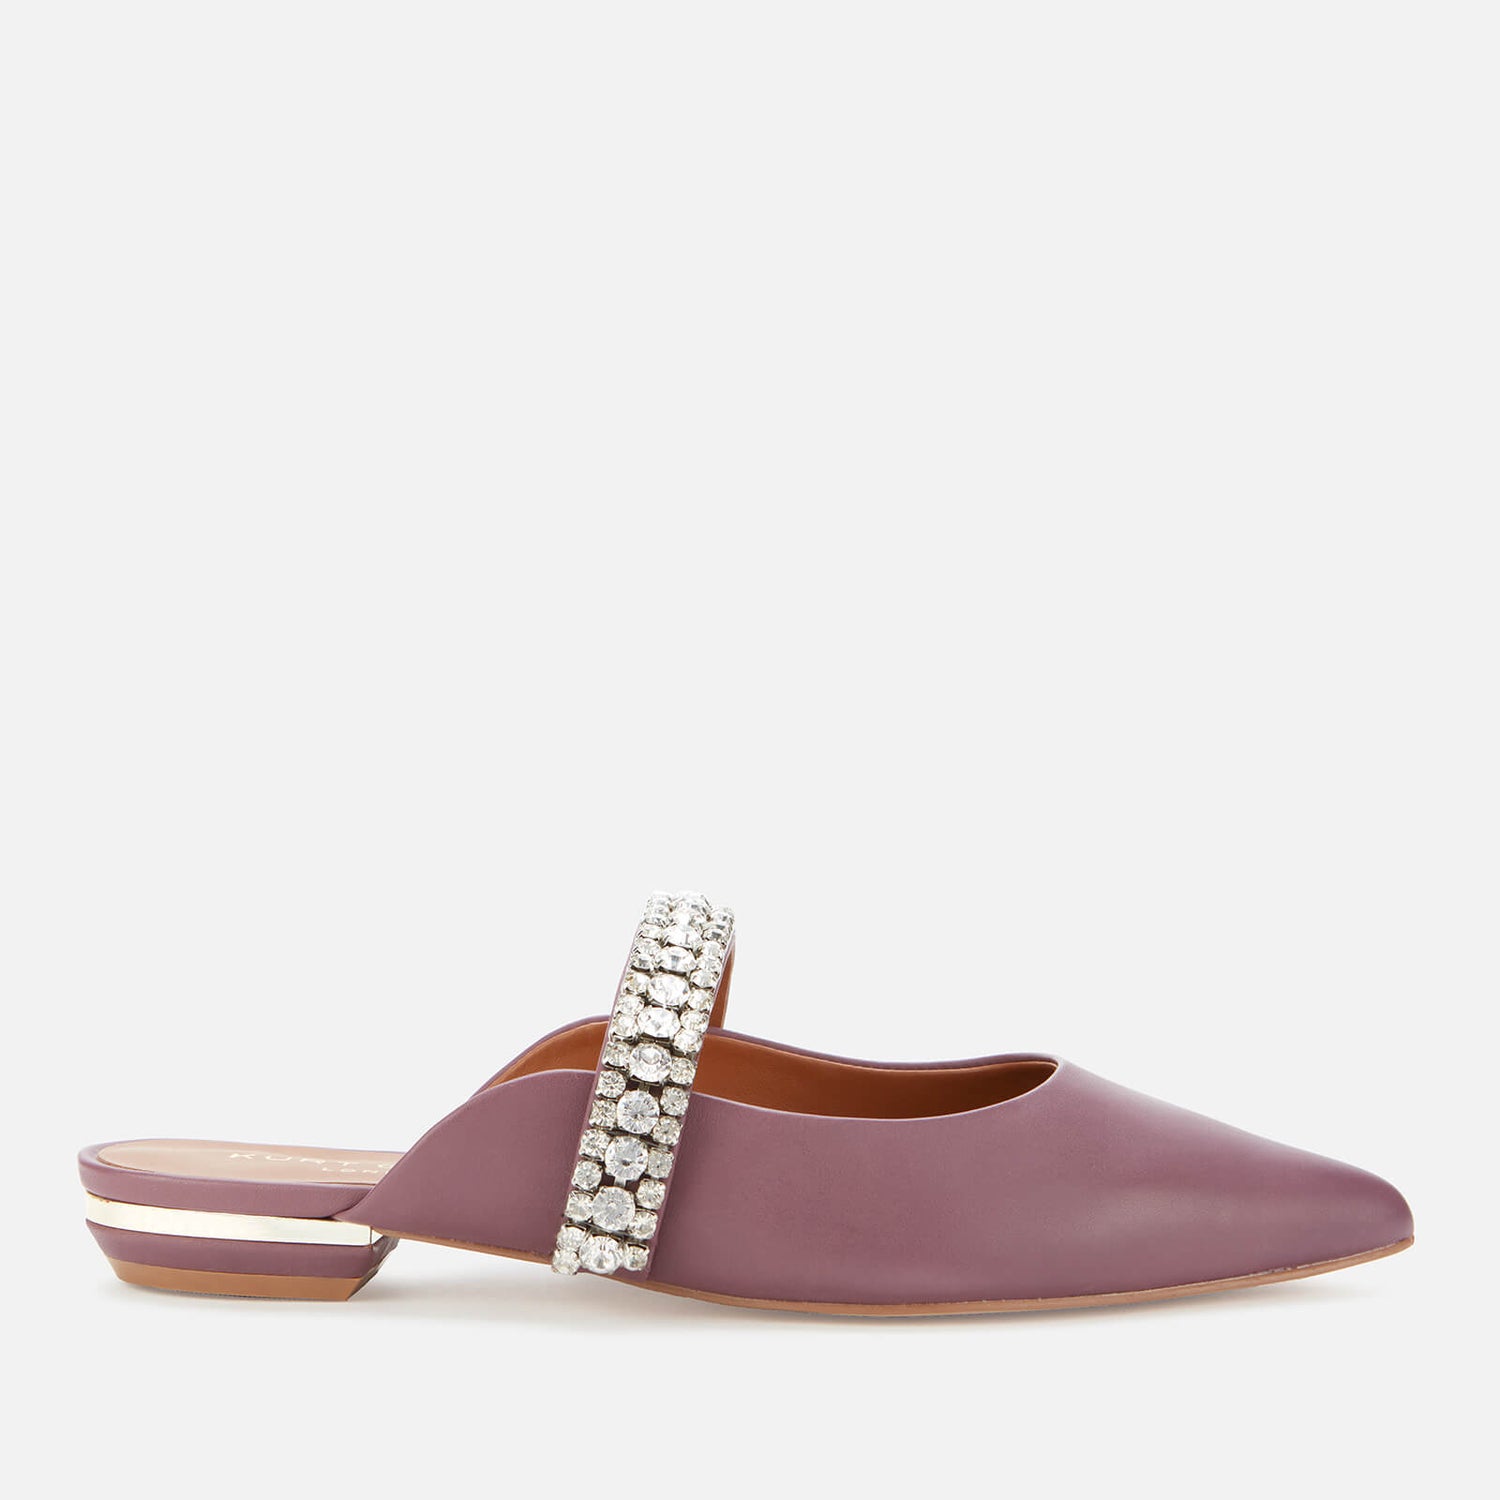 Kurt Geiger London Women's Princely Leather Pointed Flat Mules - Lilac ...